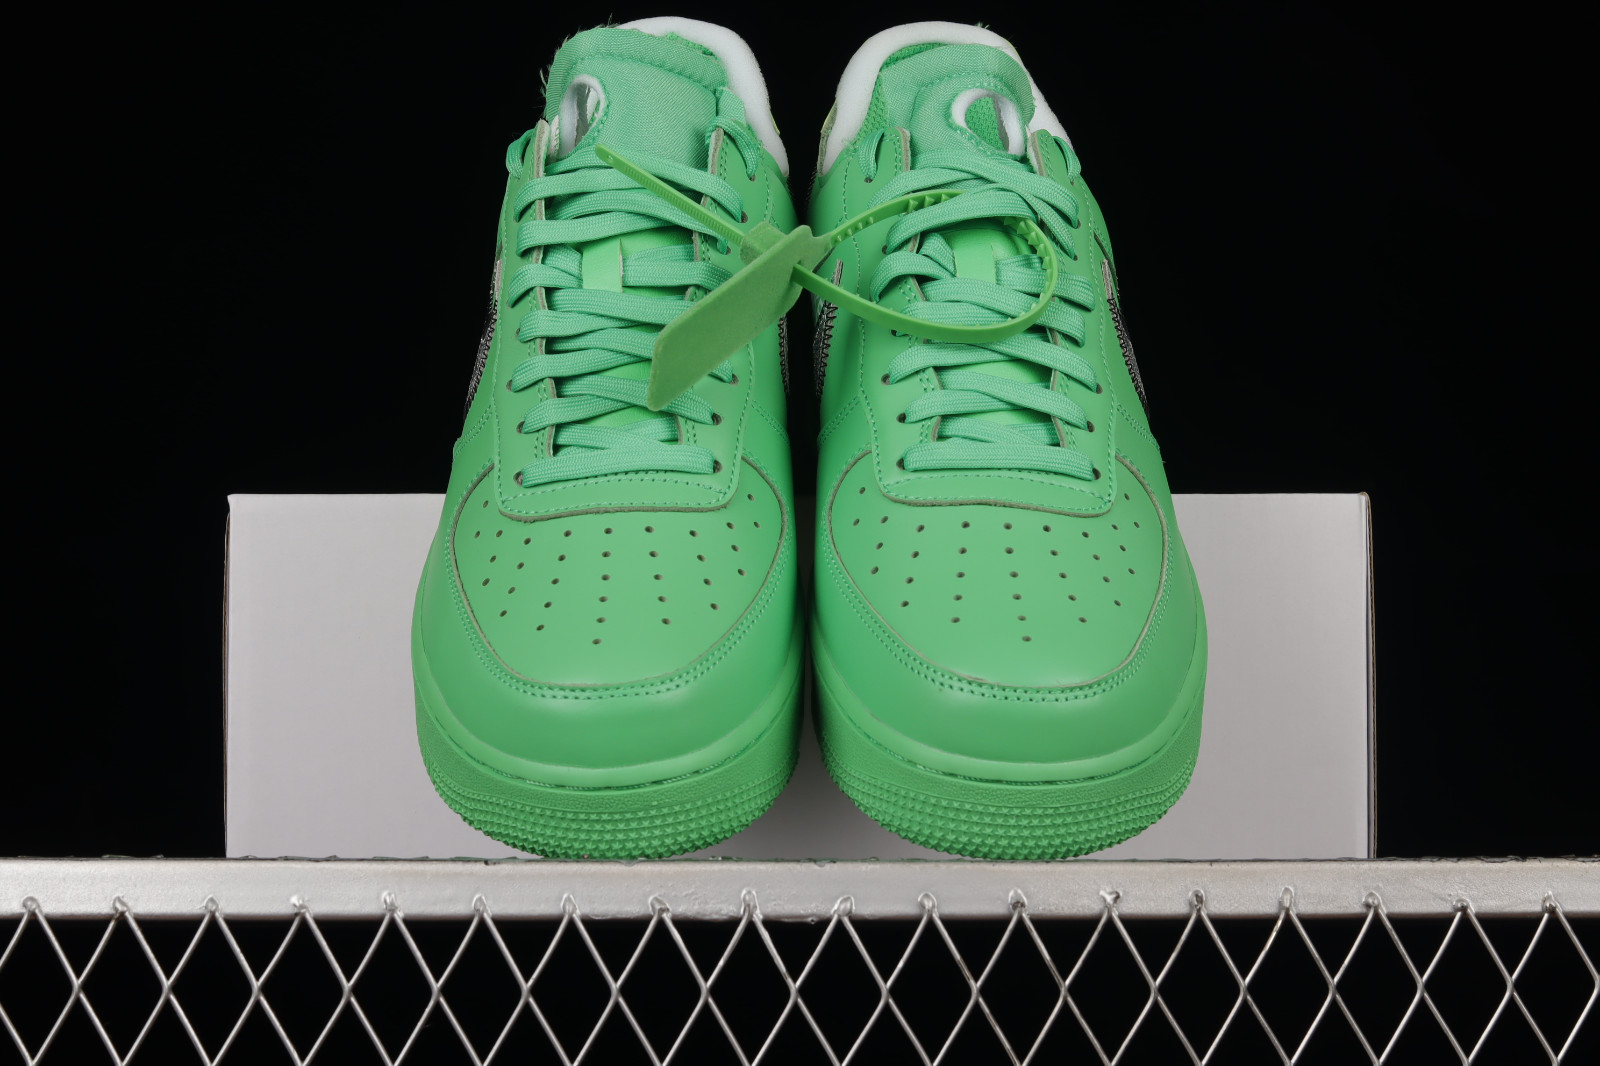 OFF-WHITE x Nike Air Force 1 Light Green Sparkdx1419-300